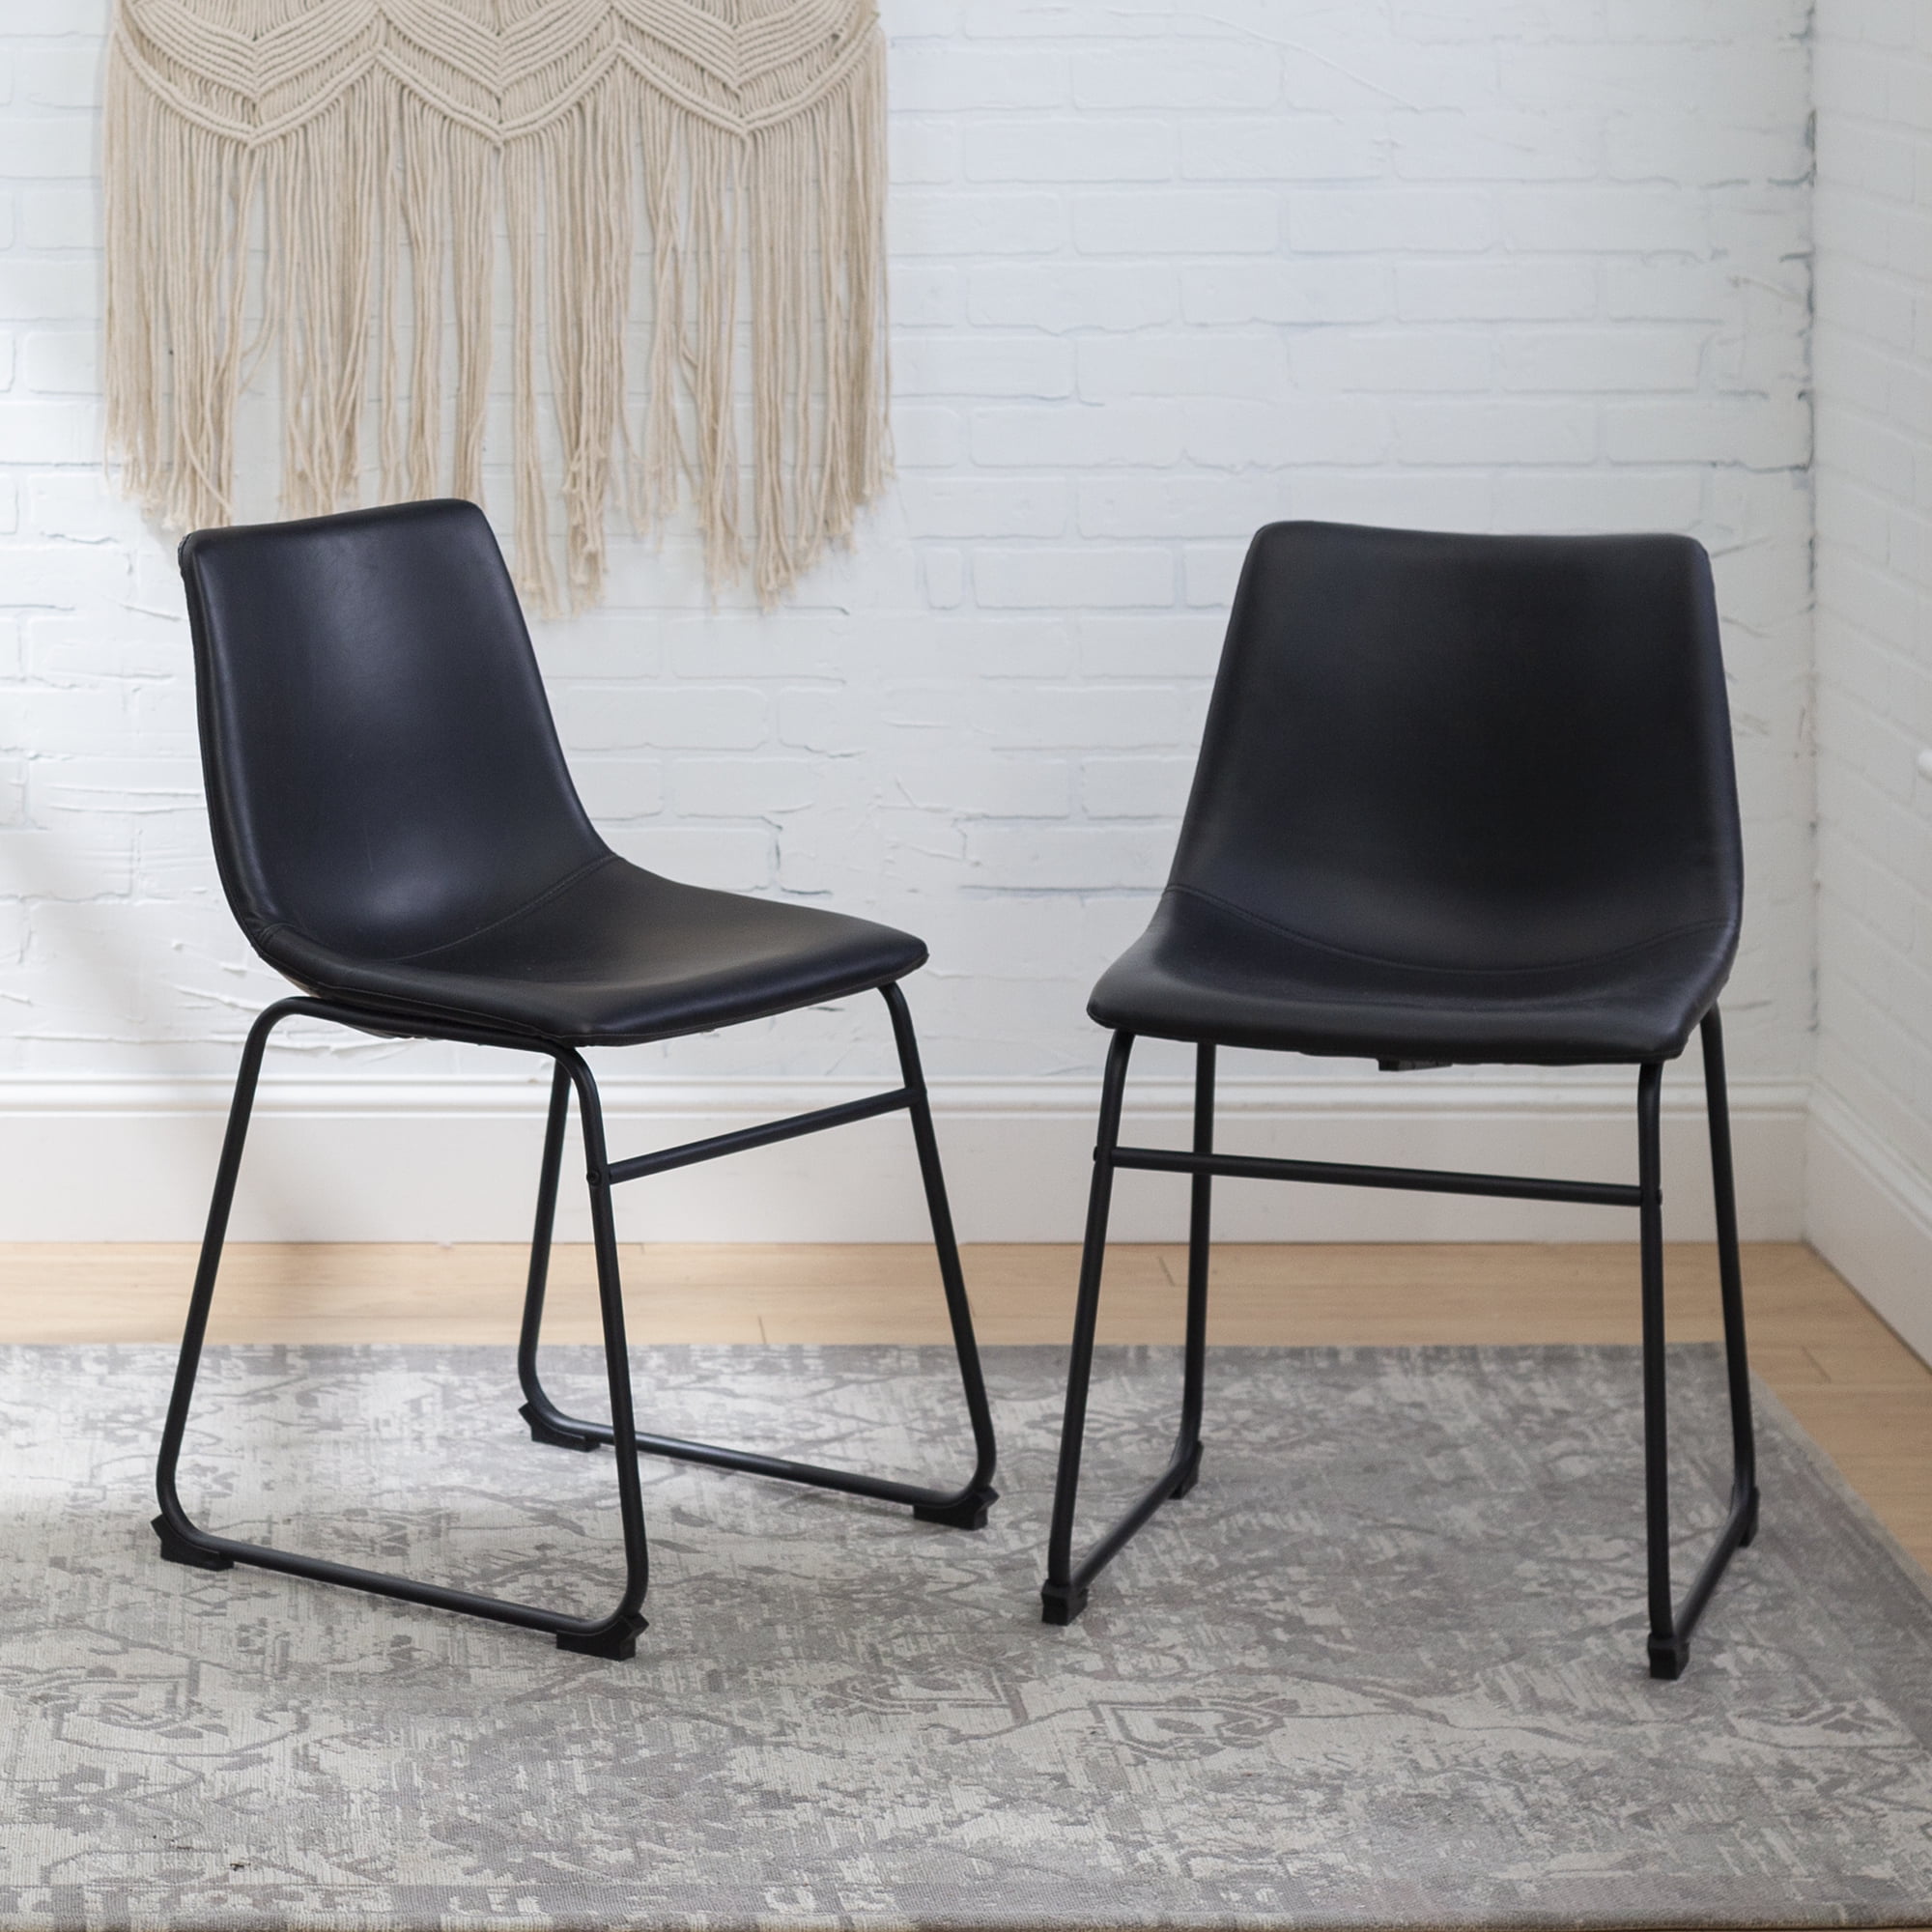 River Street Designs Worthington Faux Leather Dining Chair, Set of 2, Black Promo